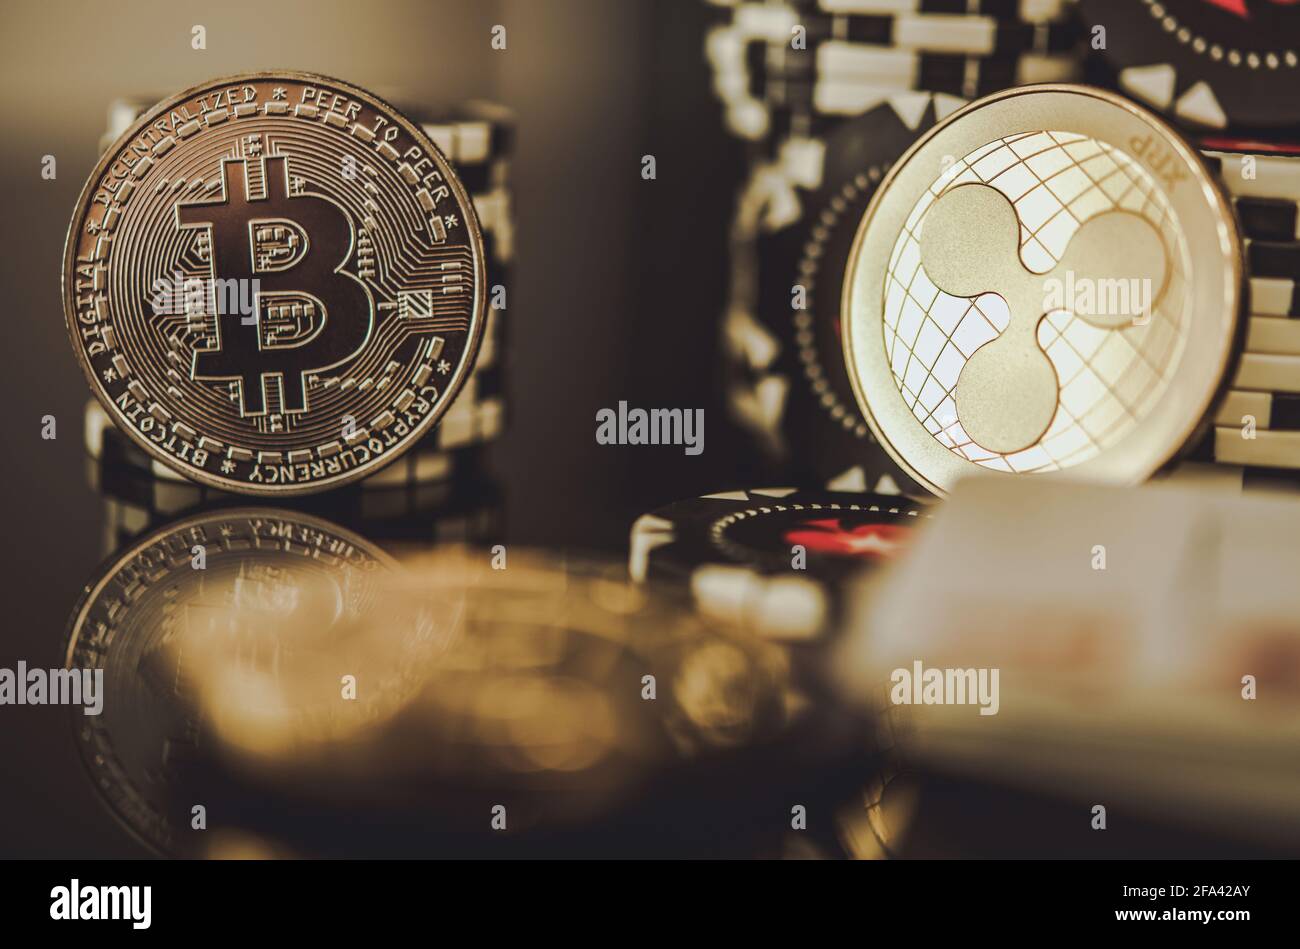 BTC Bitcoin and XRP Ripple Coins Between Casino Chips. Entertainment and Modern Blockchain Payments Concept. Stock Photo